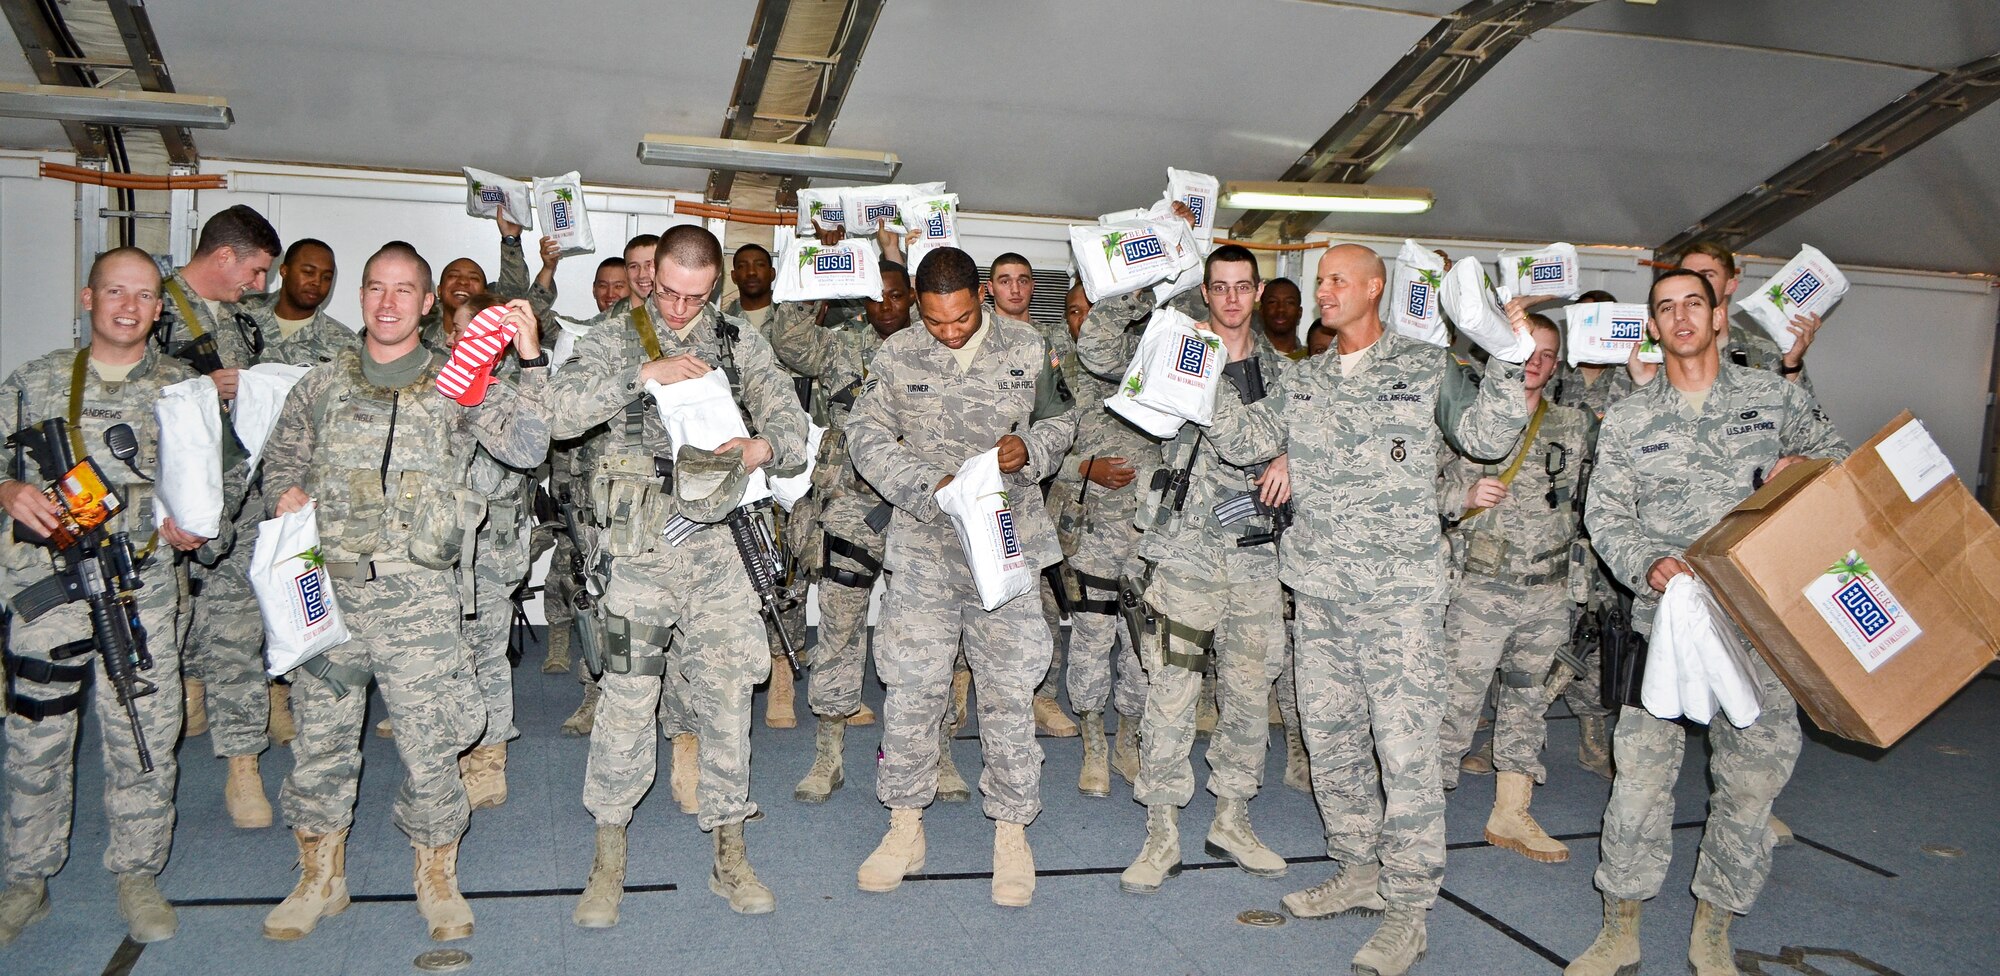 Airmen deployed to the 64th Expeditionary Security Forces Squadron received Christmas-In-July care packages from the United Services Organization, Inc., in Southwest Asia, Aug. 8, 2013. (U.S. Air Force photo/Staff Sgt. Minerva Rosario)